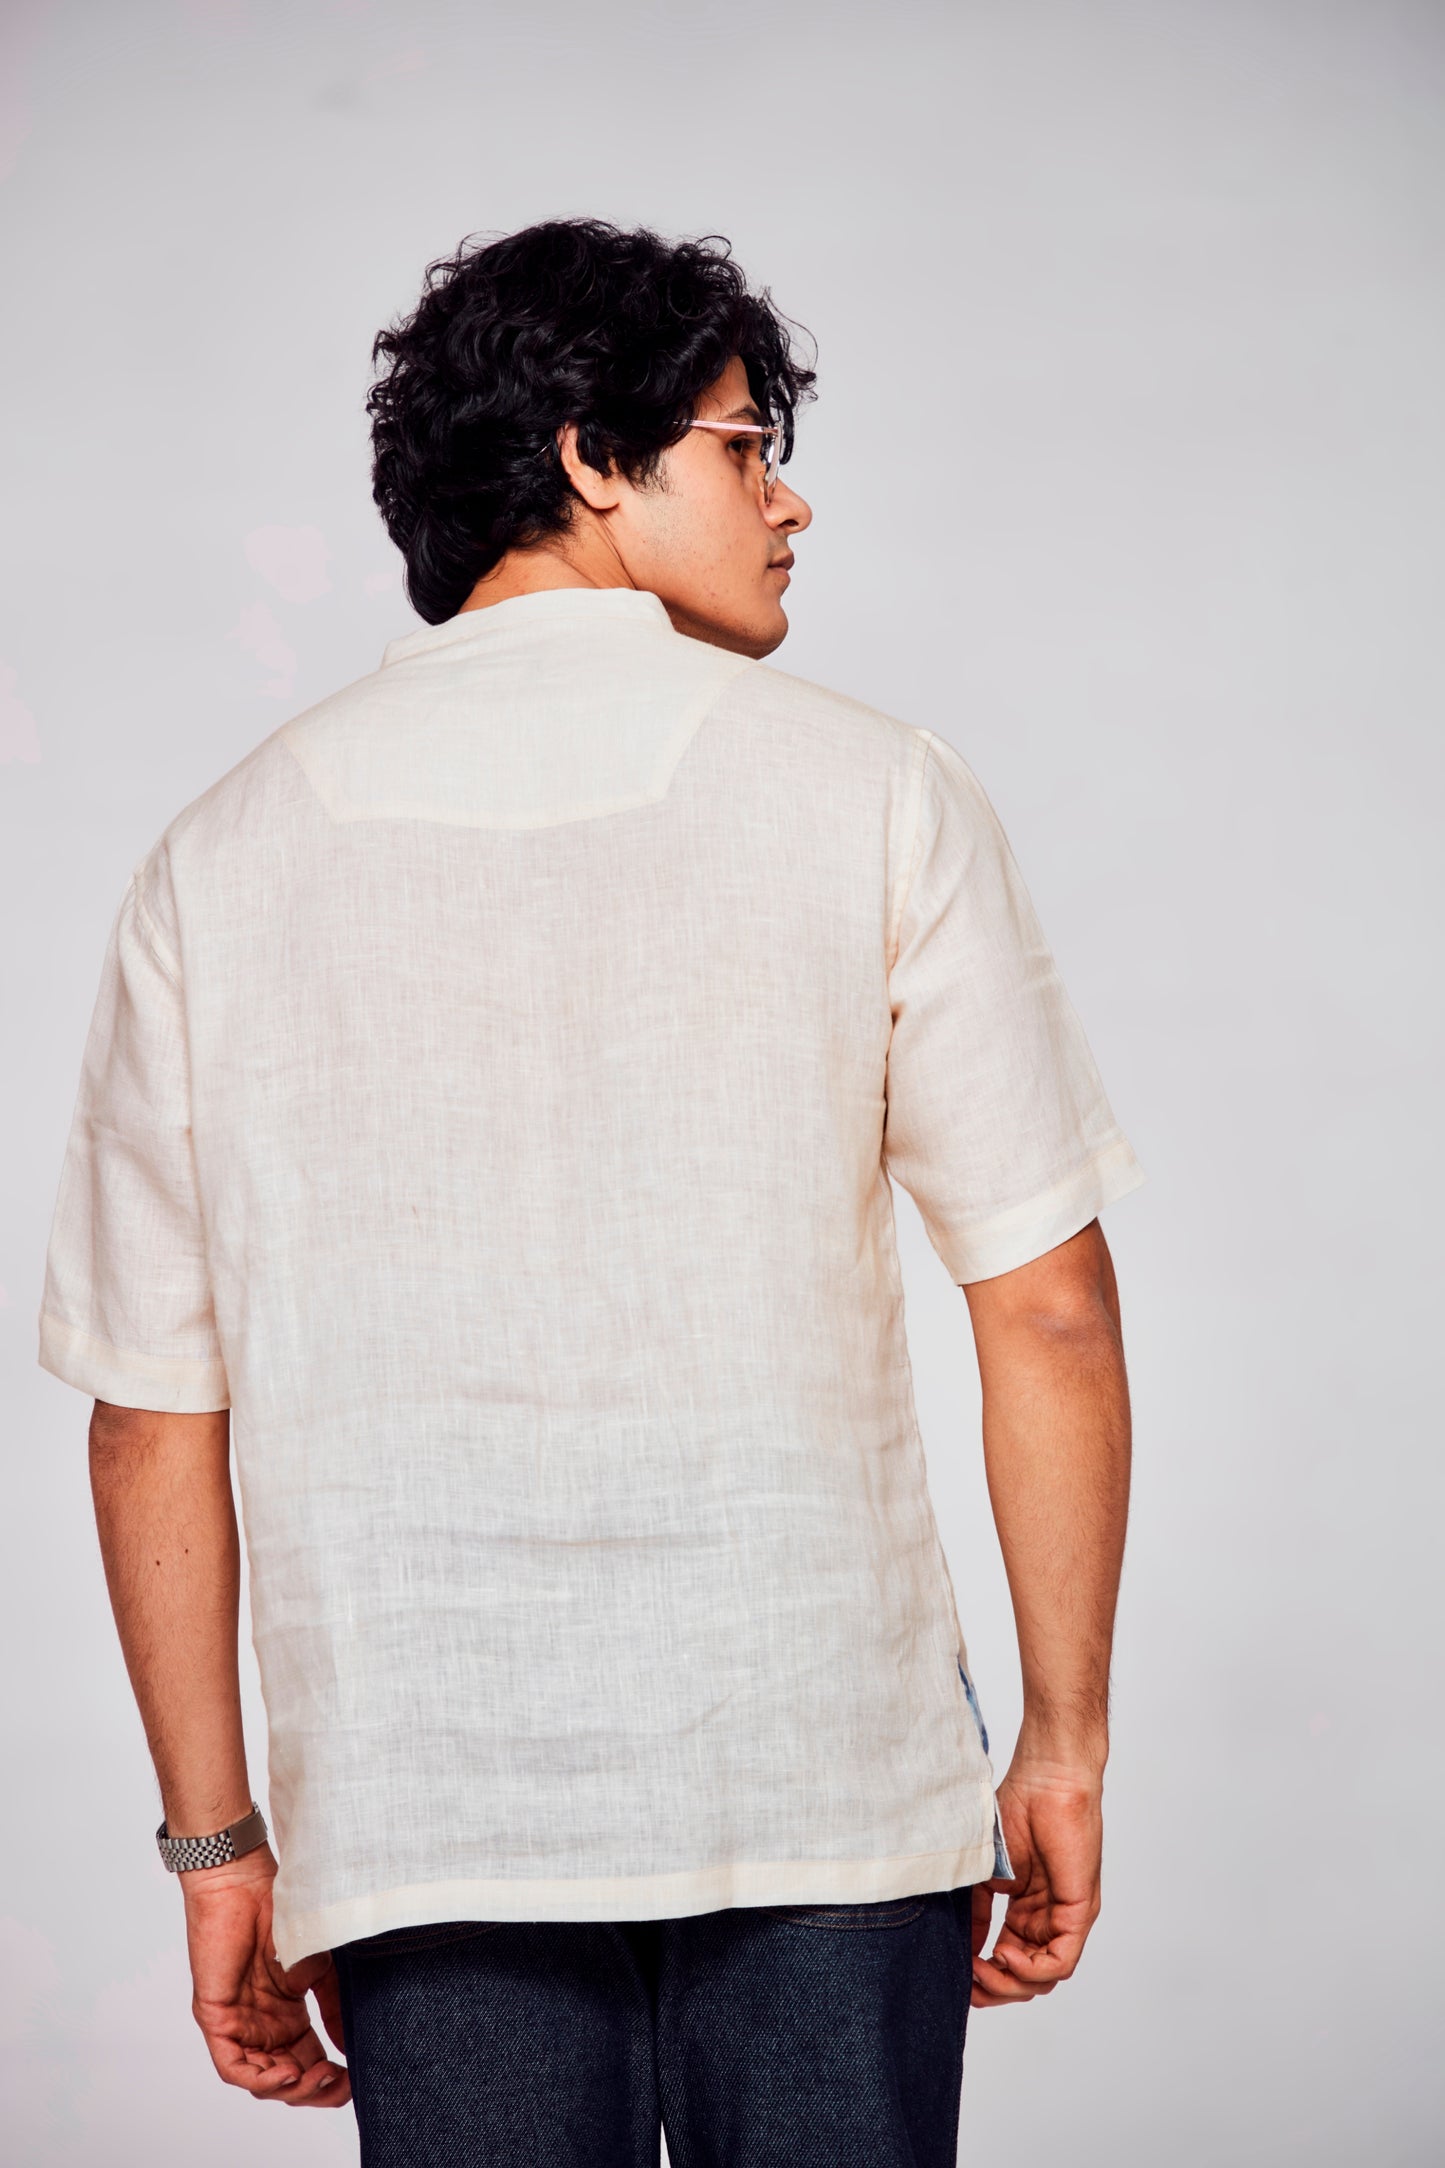 Winged Serenity : Nature's Grace with Avian Elegance - Pure Linen Short Sleeve